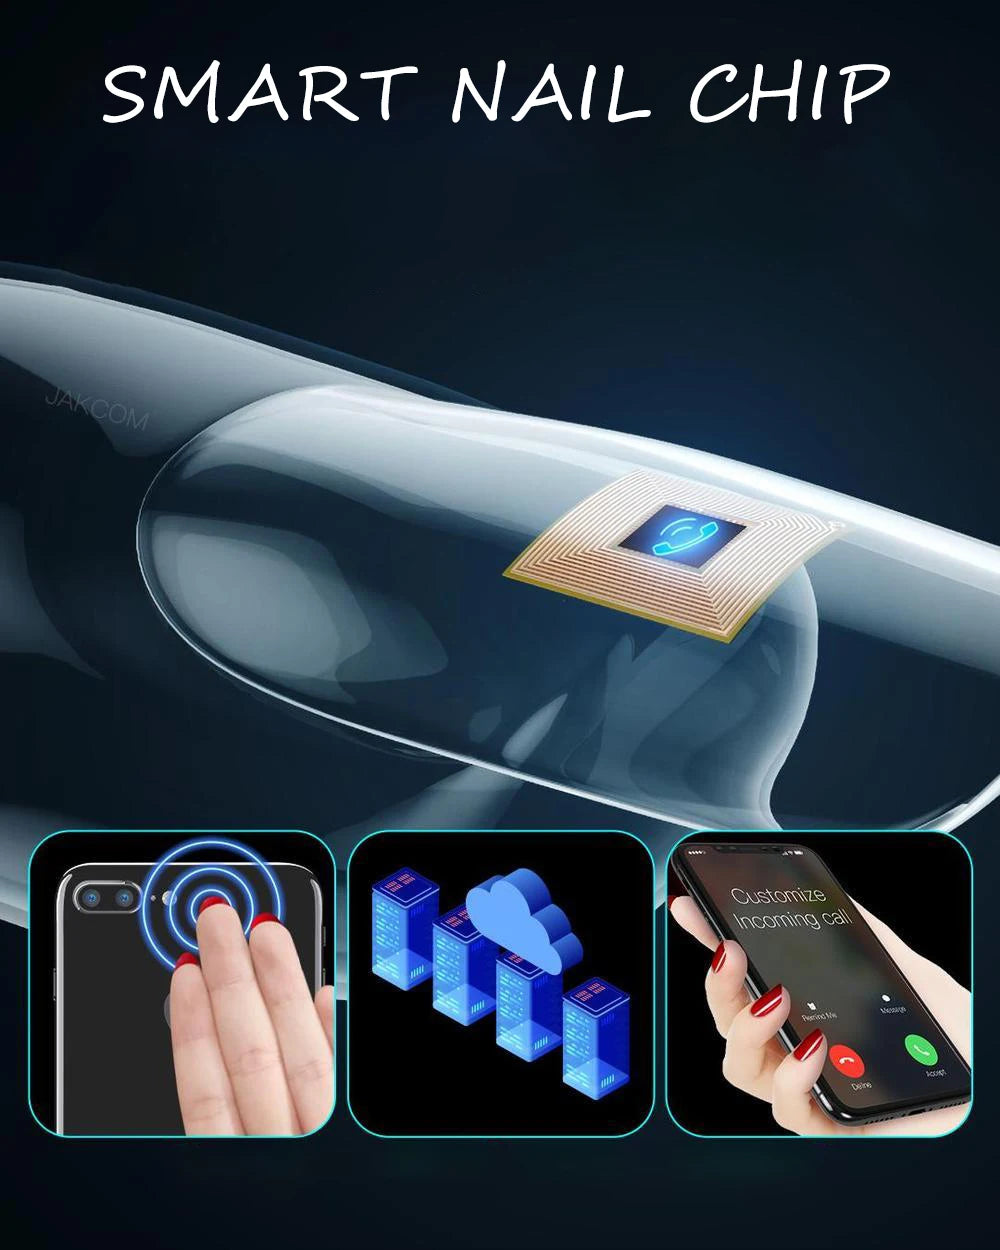 Smart Nail New Multi Function Chip Intelligent Nail No Charge Required New NFC Smart Wearable Gadget For Phone Call Self Defence